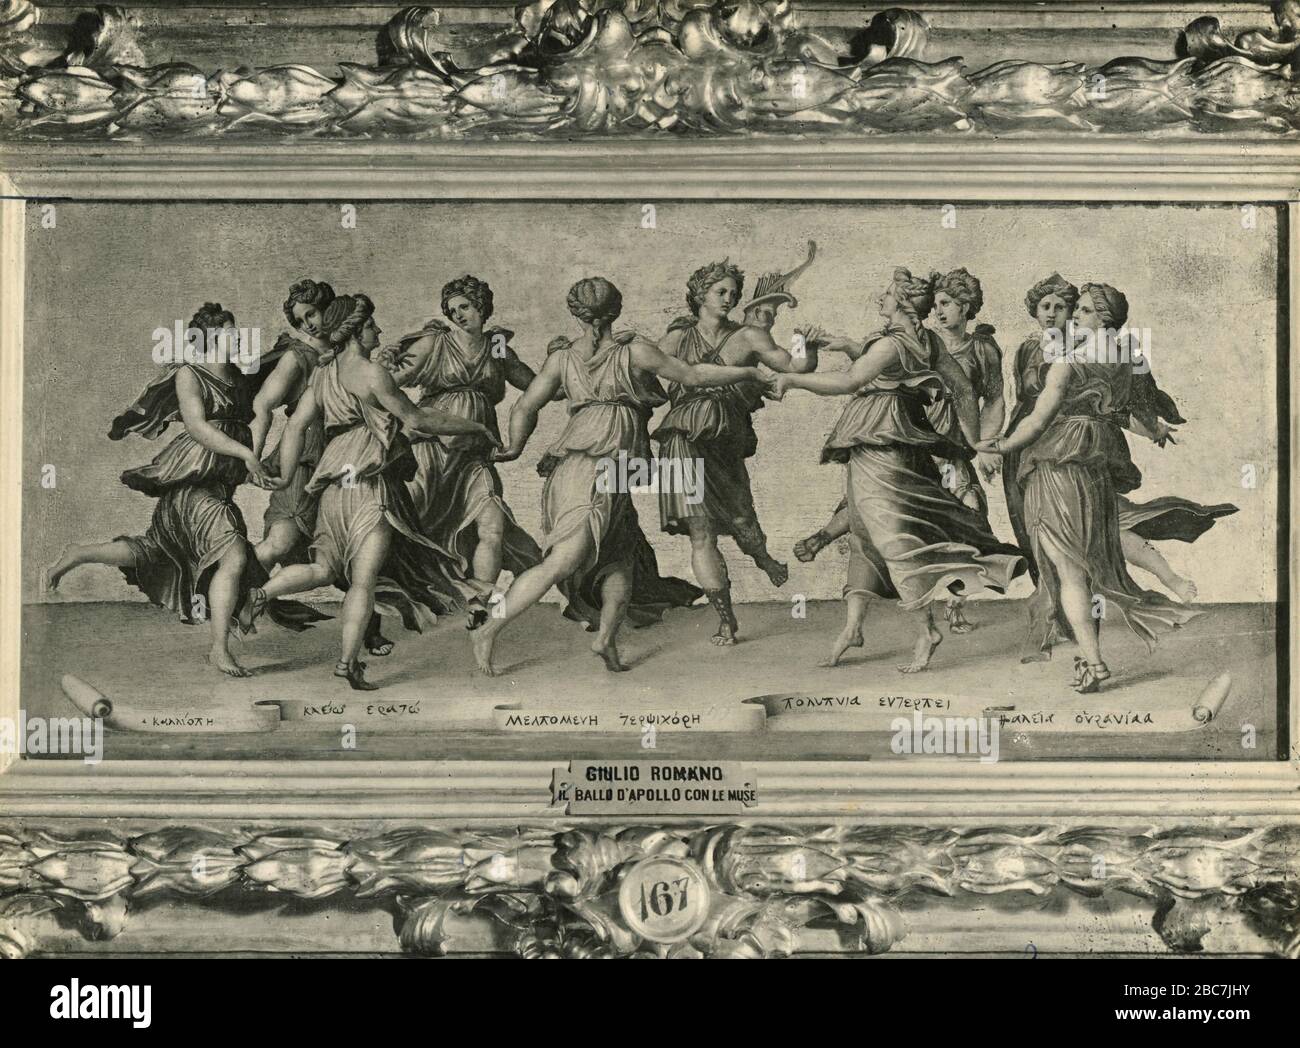 Apollo dancing with the Muses, painting by Italian artist Giulio Romano, Pitti Gallery, Florence, Italy 1920s Stock Photo